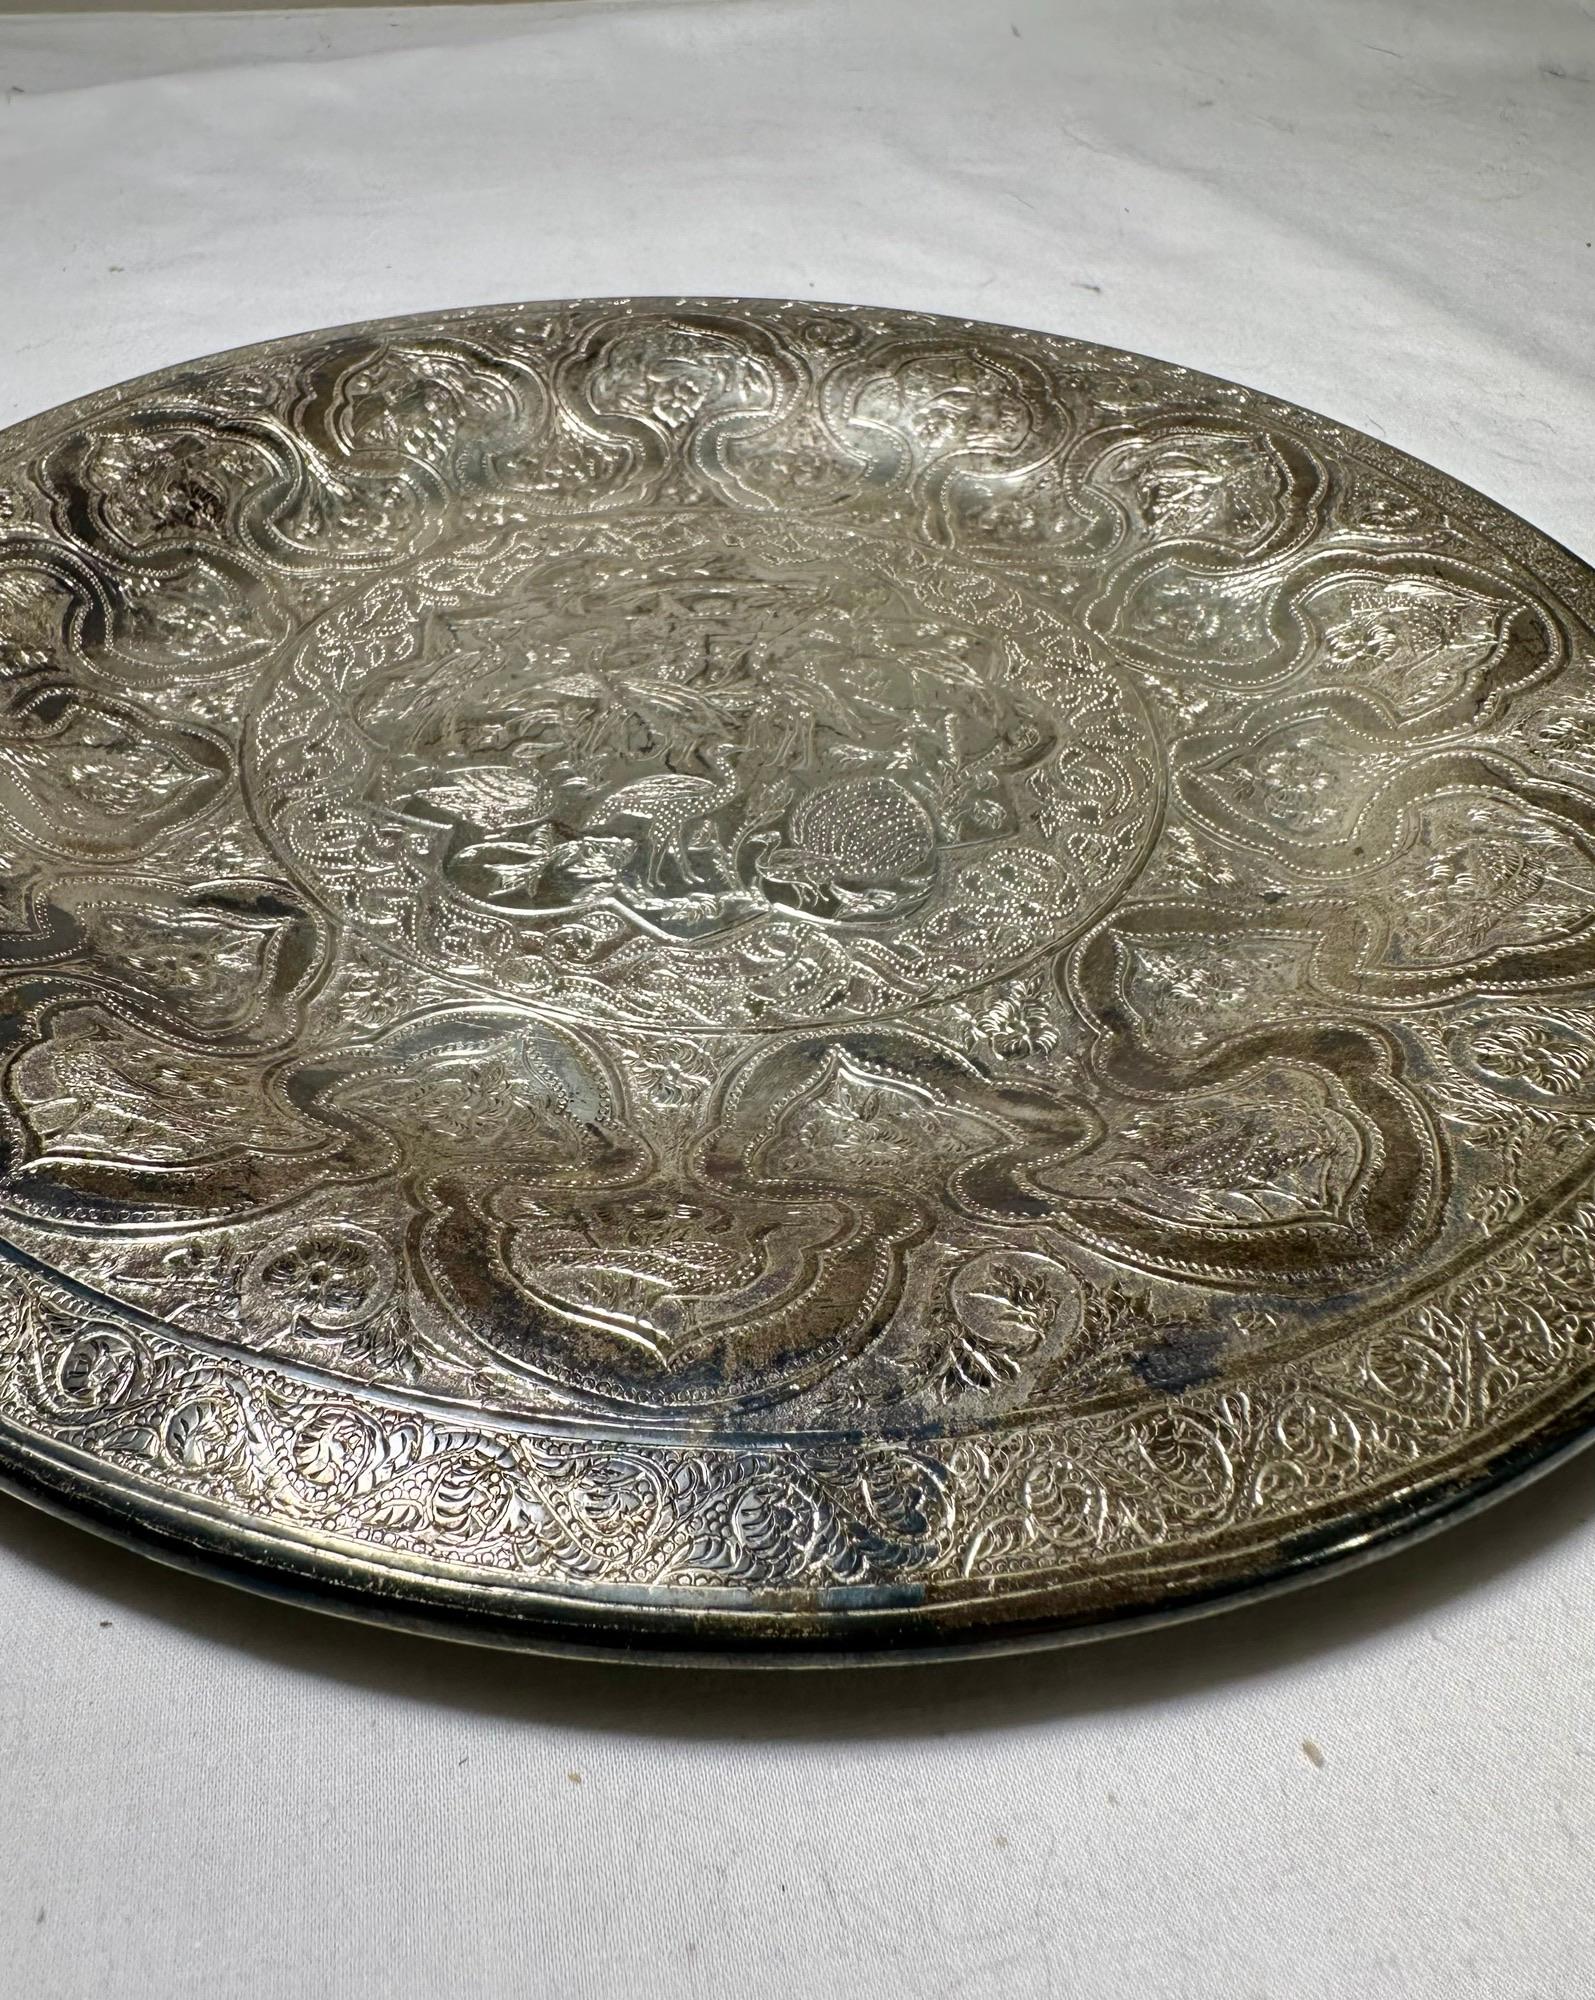 Vintage Persian Zandi Middle Eastern Islamic Round Silver-Plated Brass Platter.
 
This distinctive, handcrafted silver-plated heavy gauge brass platter is engraved, embossed and punched with Moorish designs centered with numerous exotic decorative